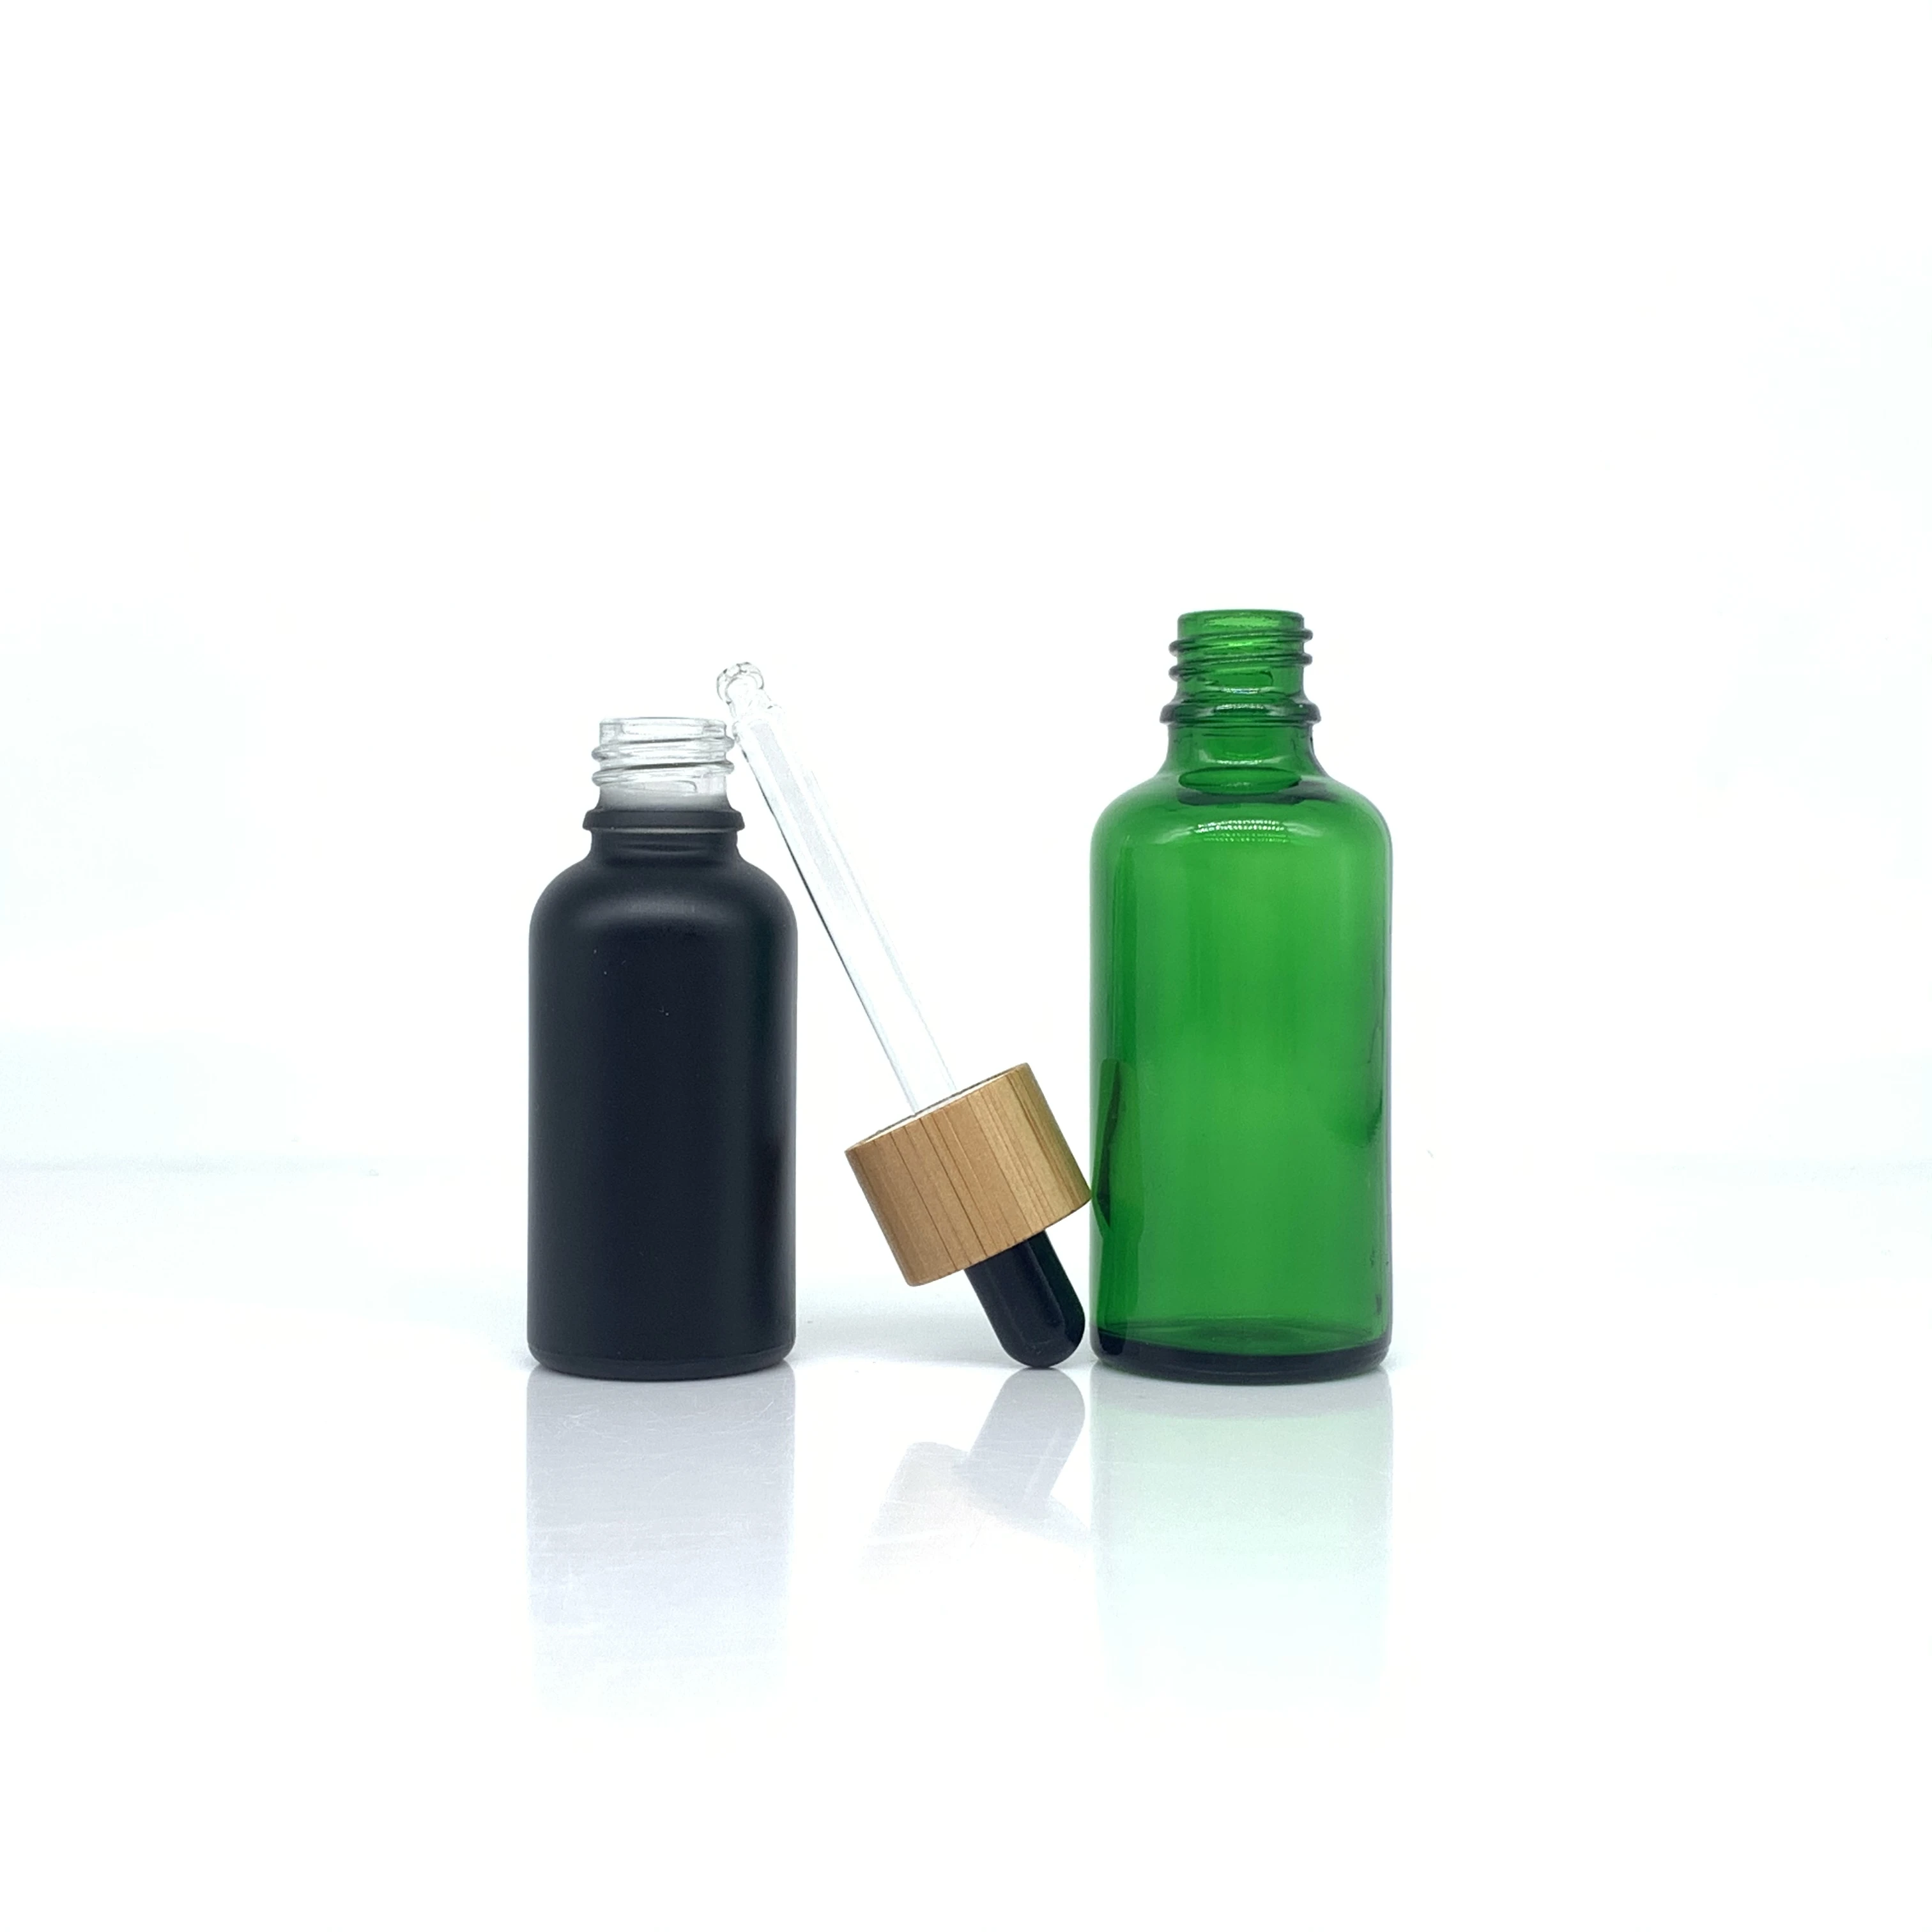 Download High Quality Green Glass Dropper Bottle With Bamboo Top 50ml Bamboo Dropper Bottle Buy Green Dropper Bottle 50ml Bamboo Bottle Glass Bottle With Bamboo Top Product On Alibaba Com